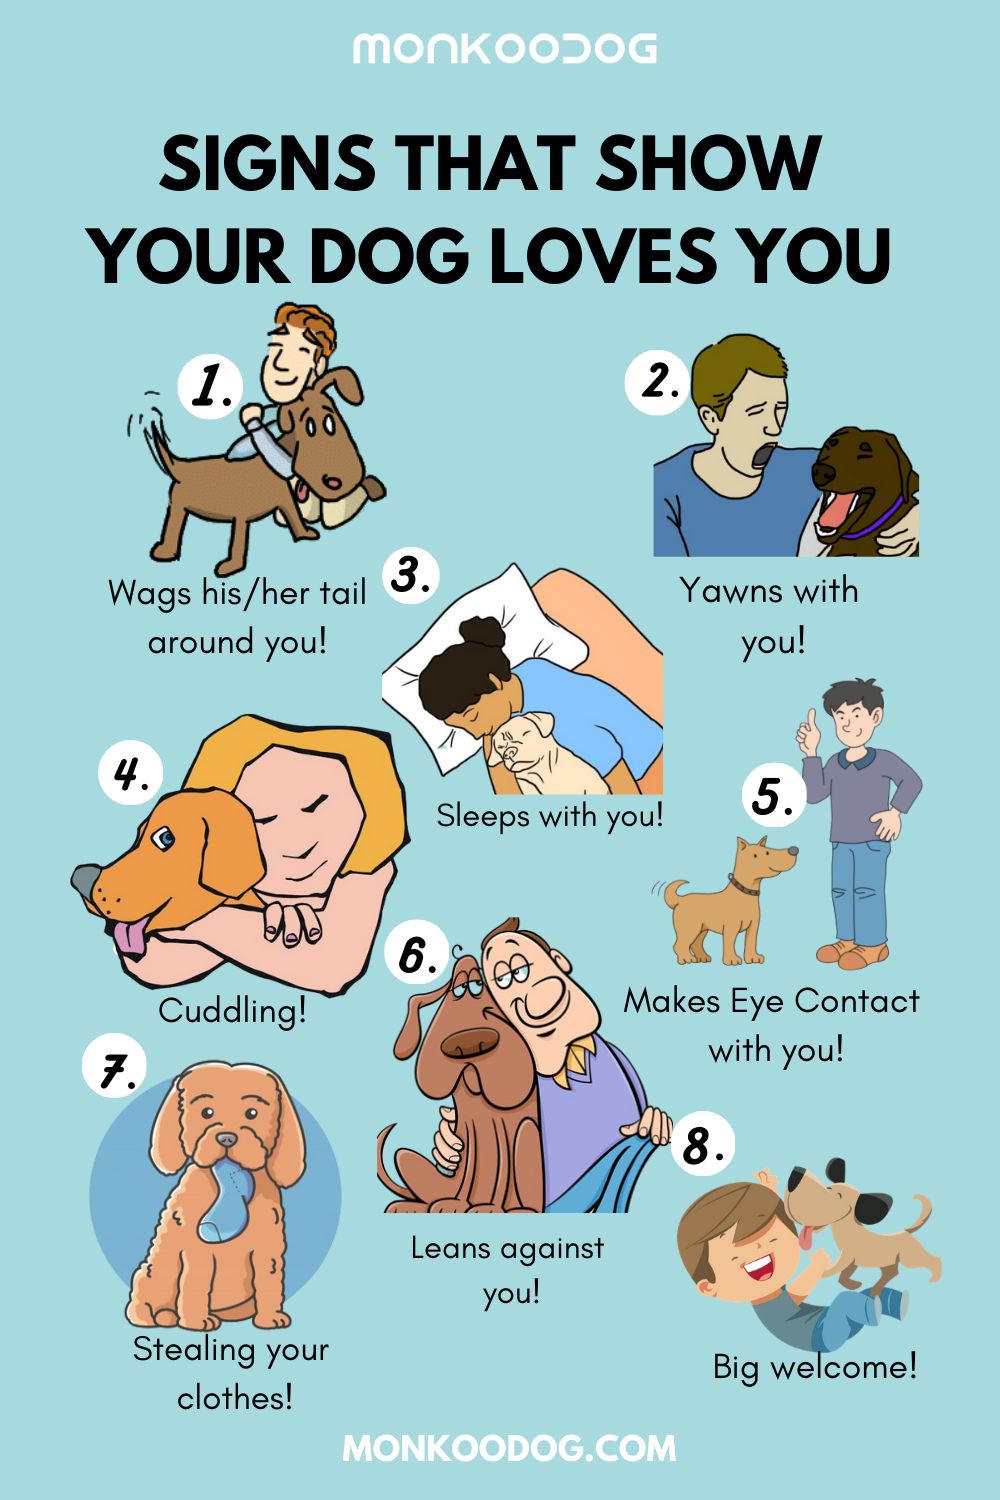 how do you know who your dog loves the most